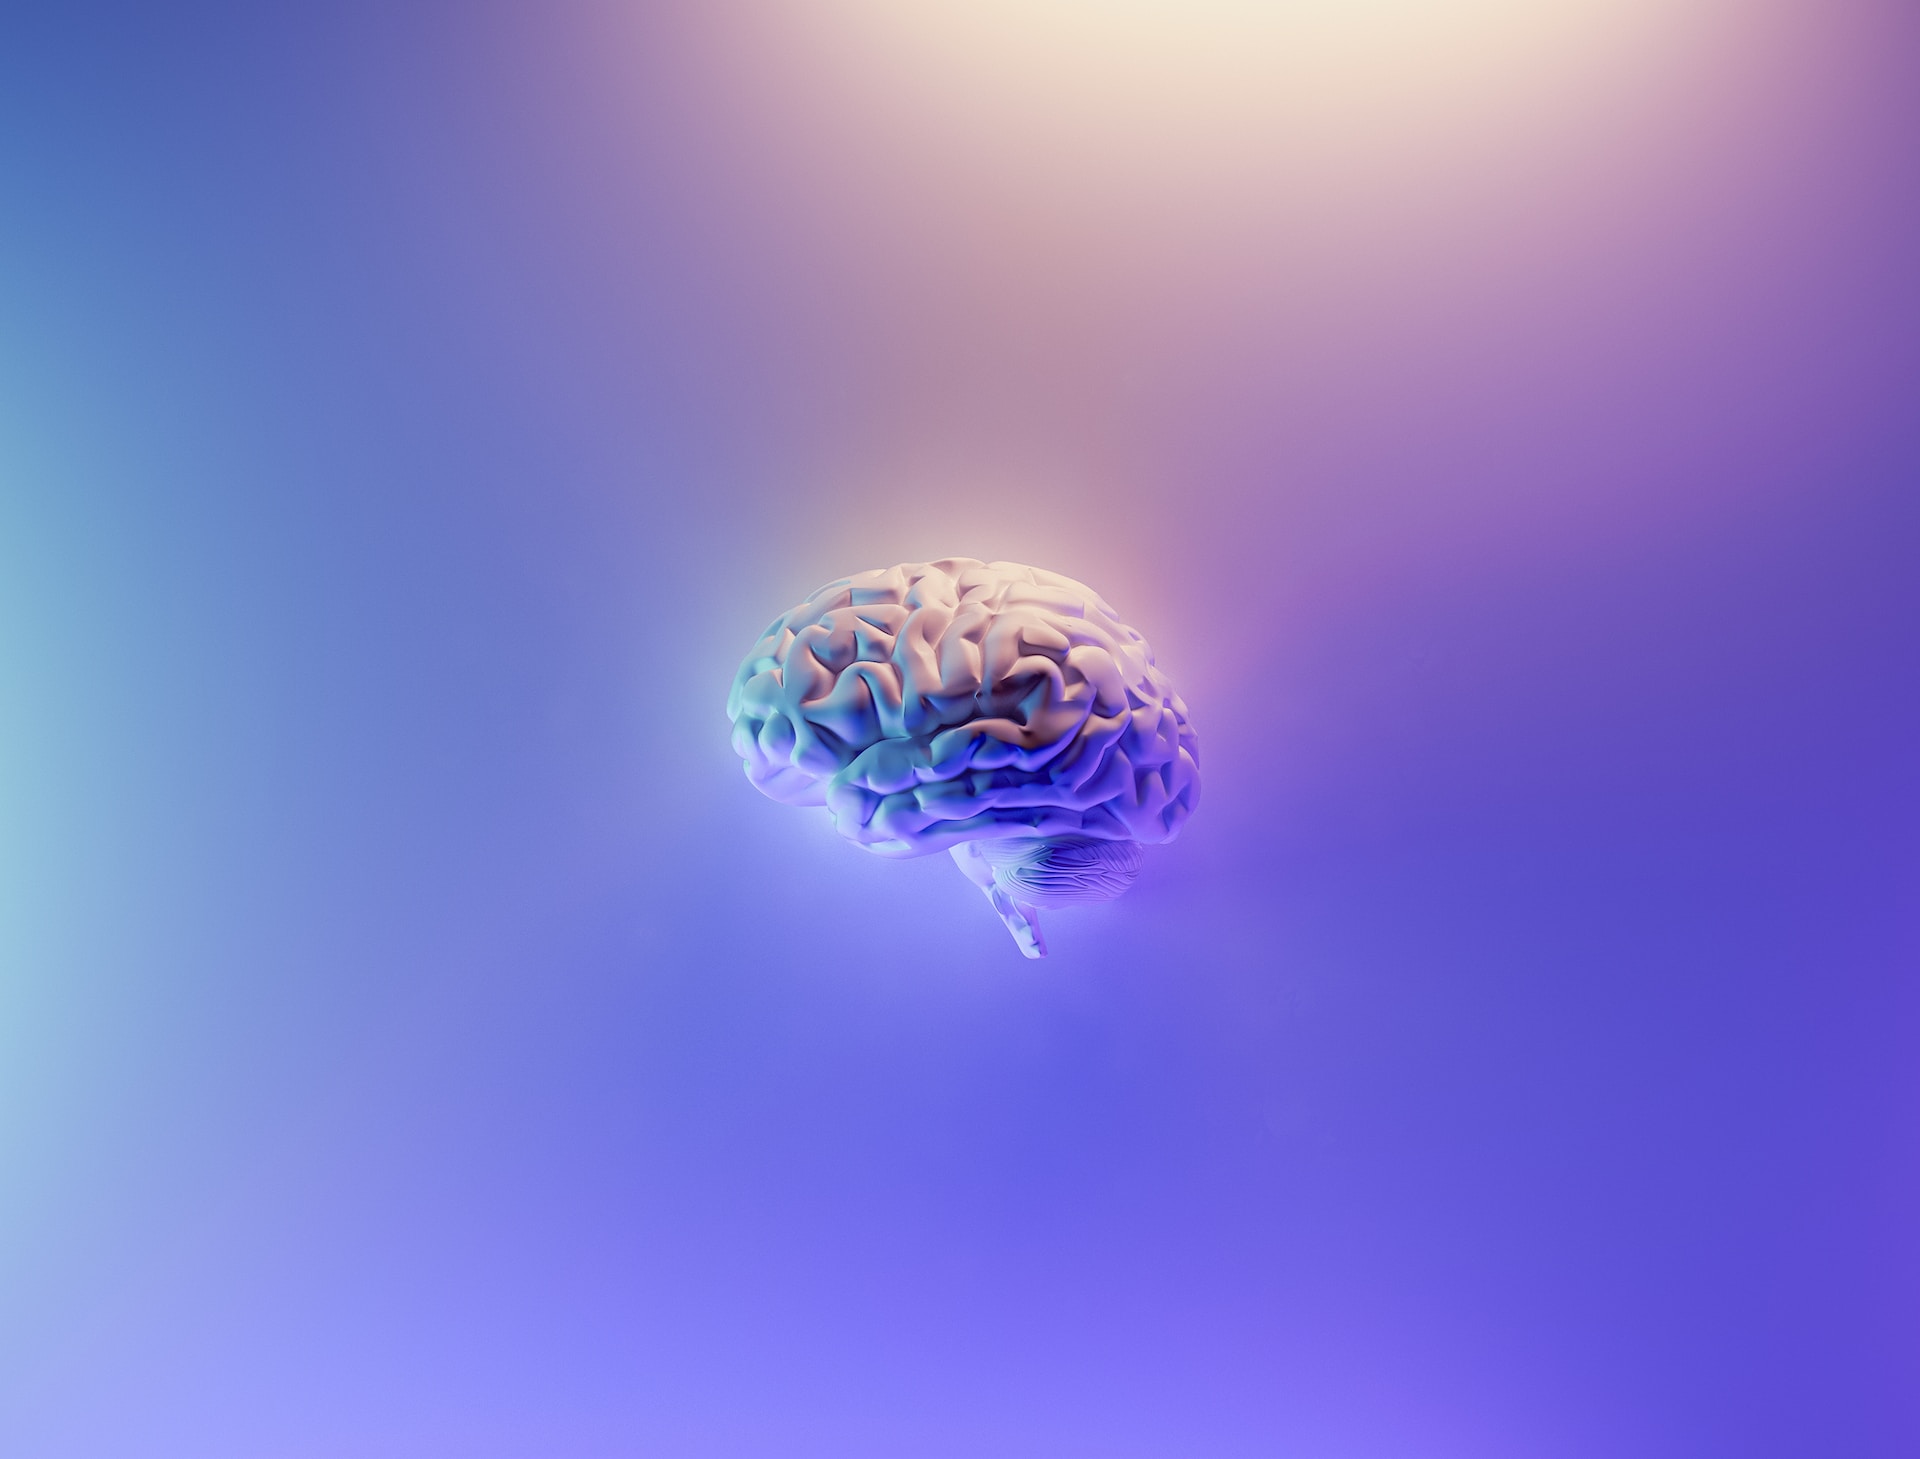 Decades-Long Bet on Consciousness Ends